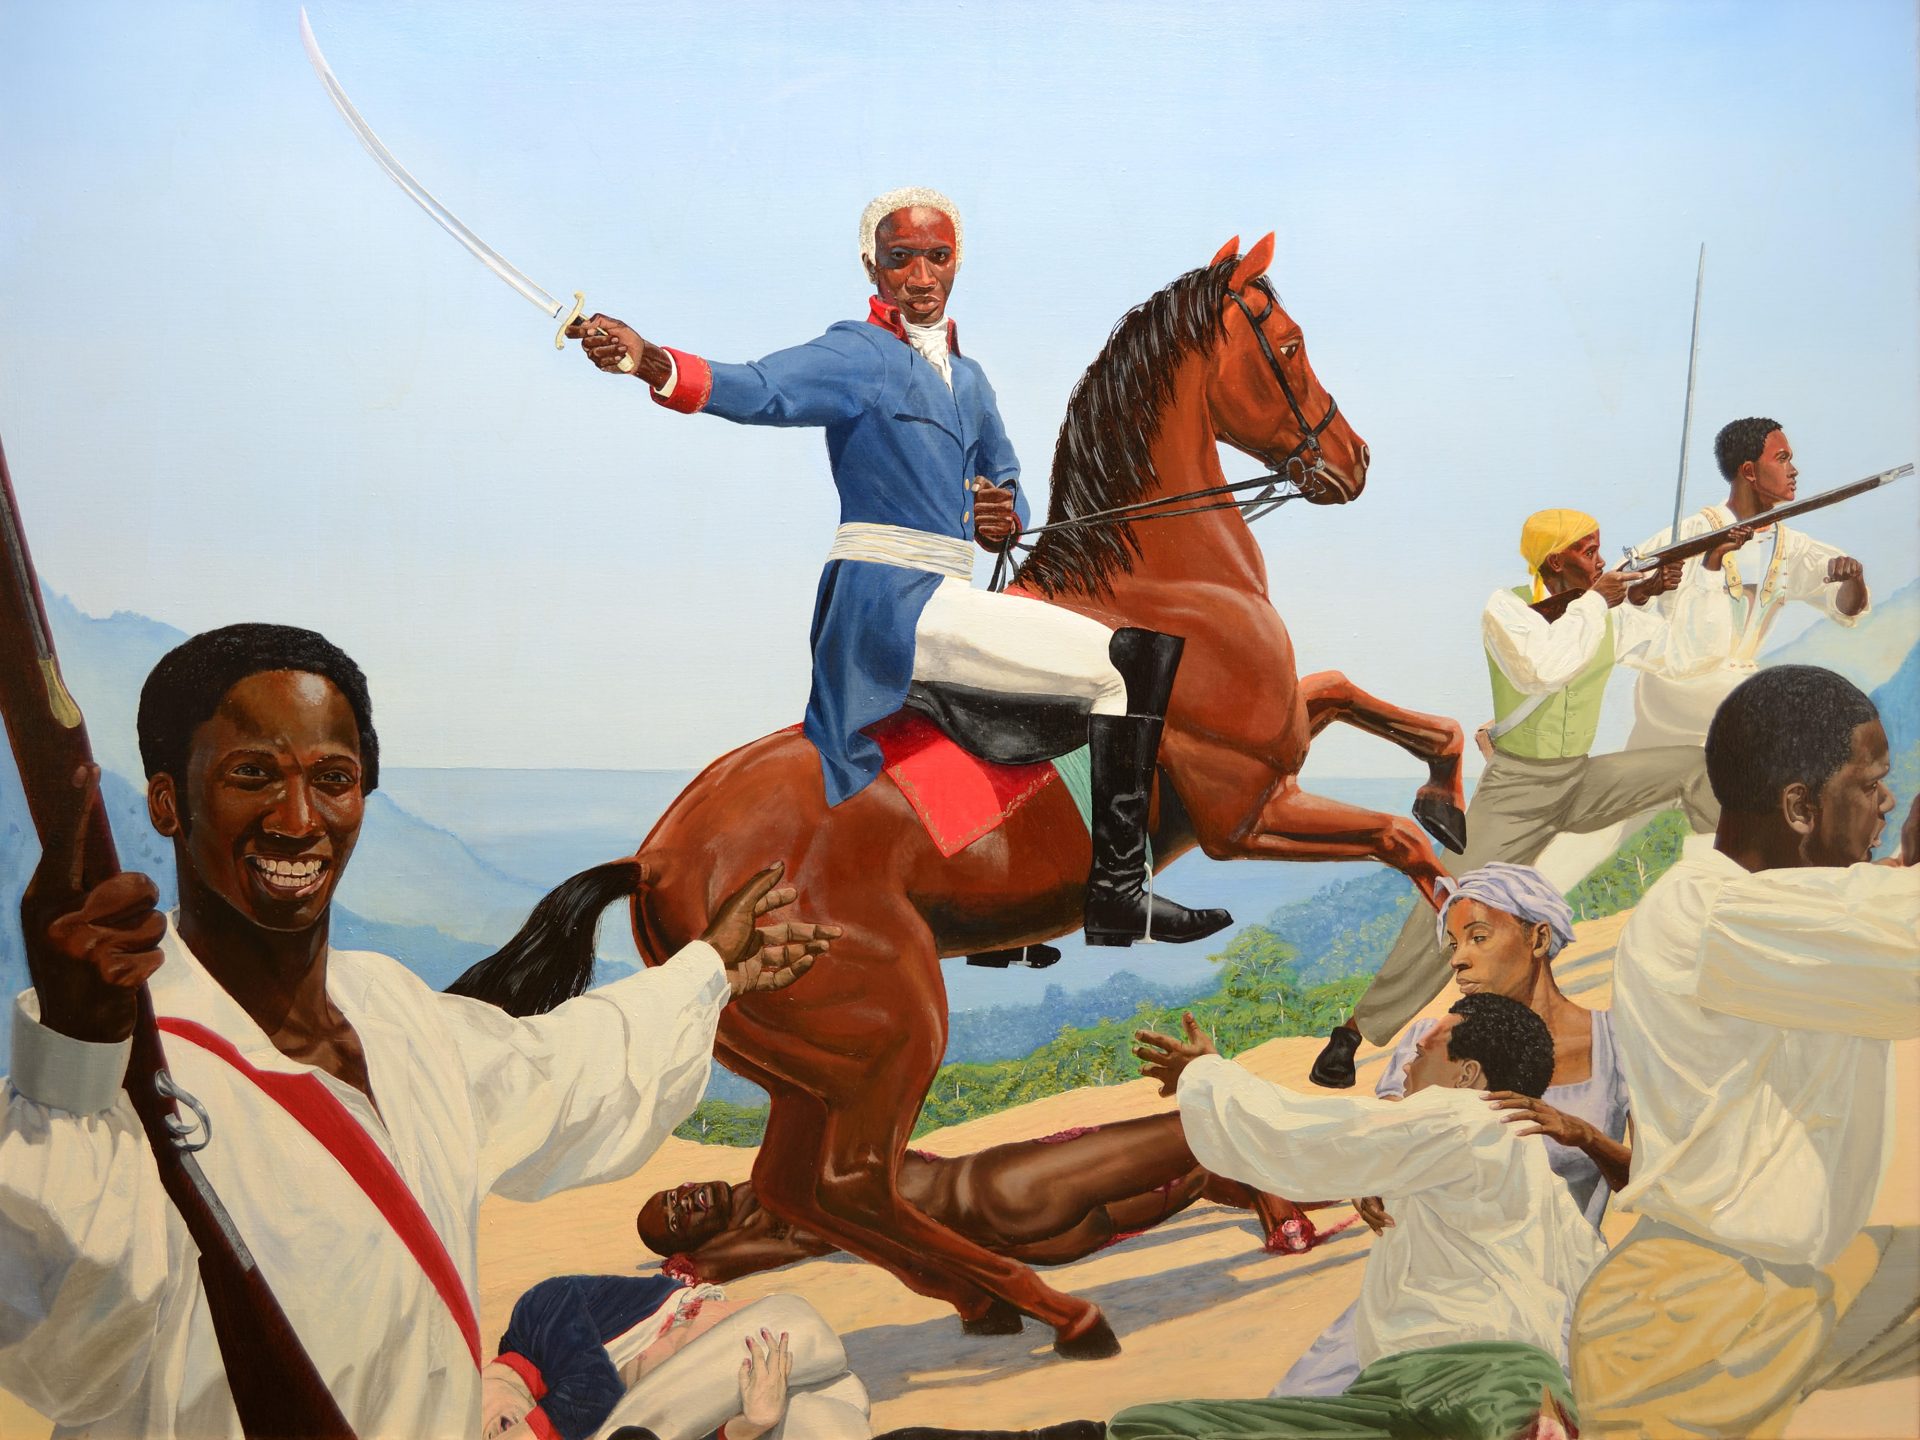 Kimathi Donkor’s Touissant
L’Ouverture at Bedourette, a
reworking of Jacques-Louis David’s
Napoleon Crossing the Alps, below. Credit: Kimathi Donkor